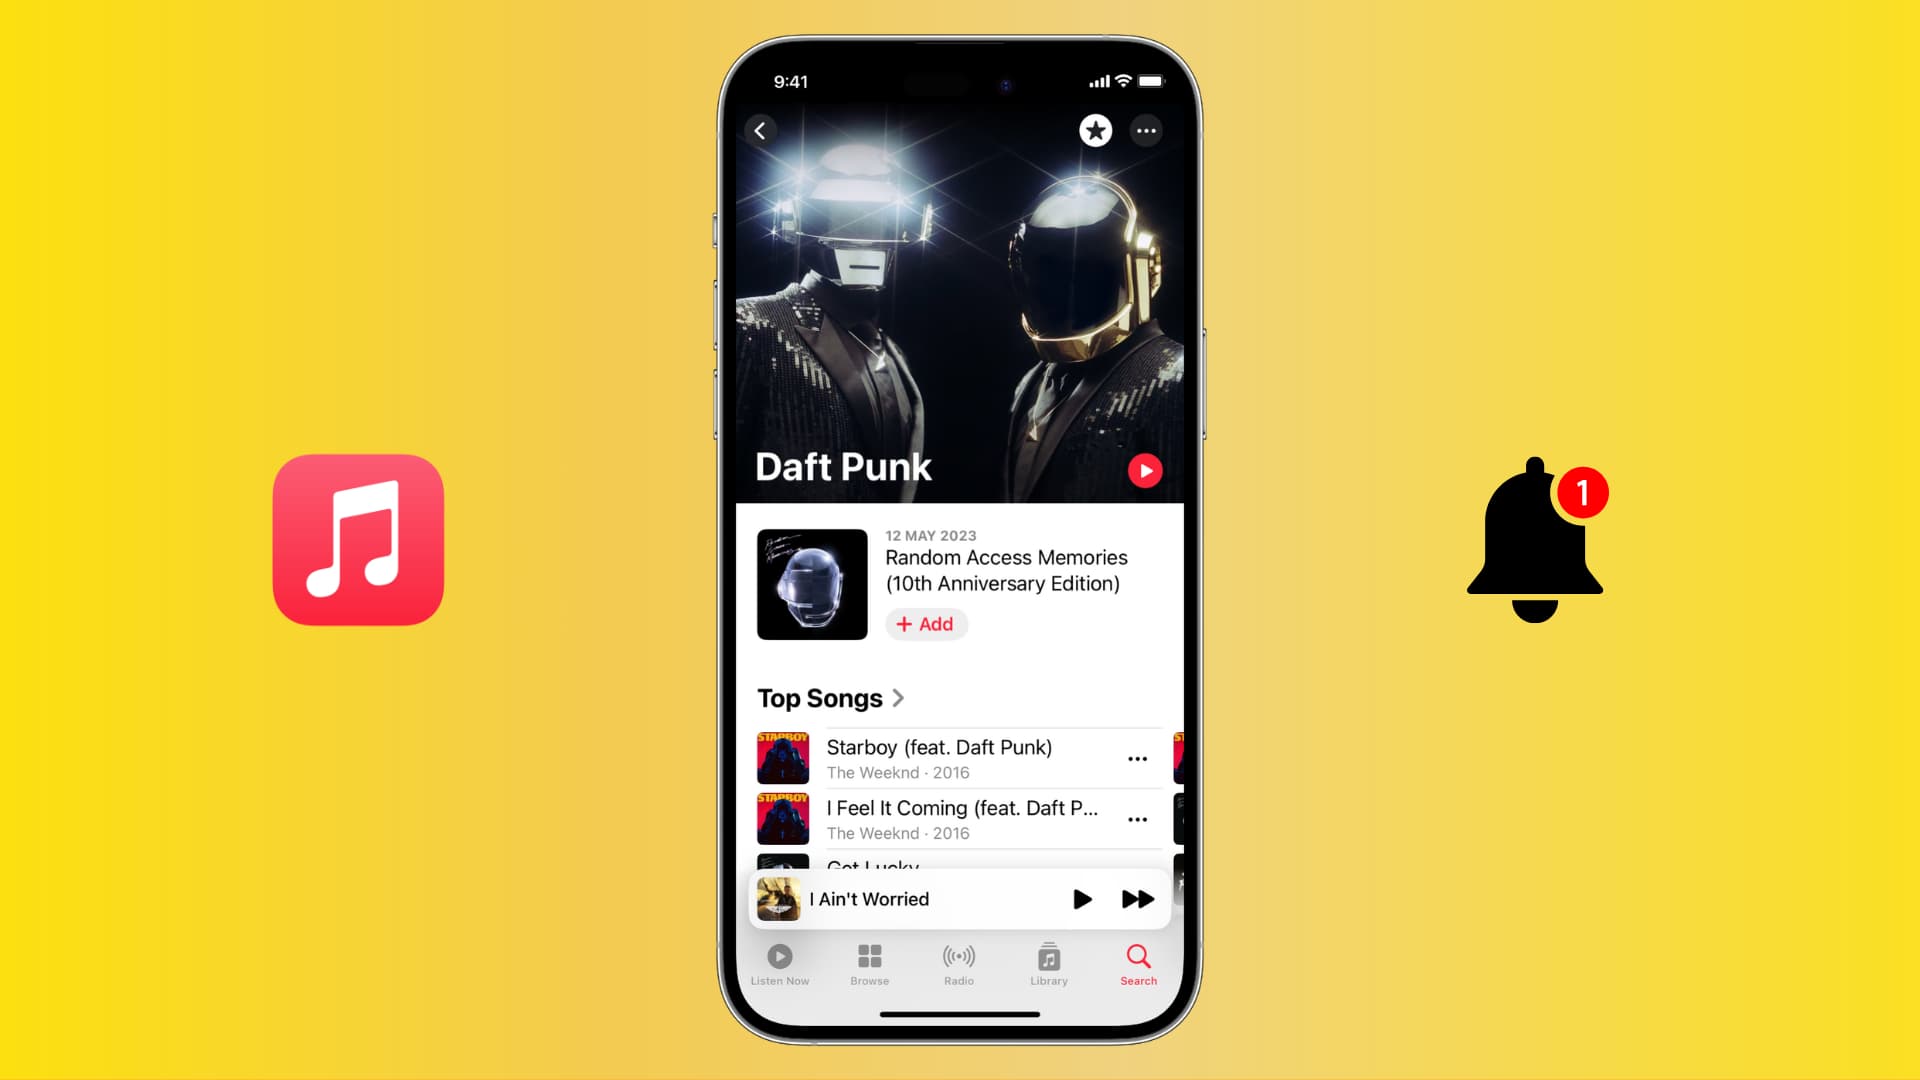 Get notified of new songs by your favorite artists on Apple Music